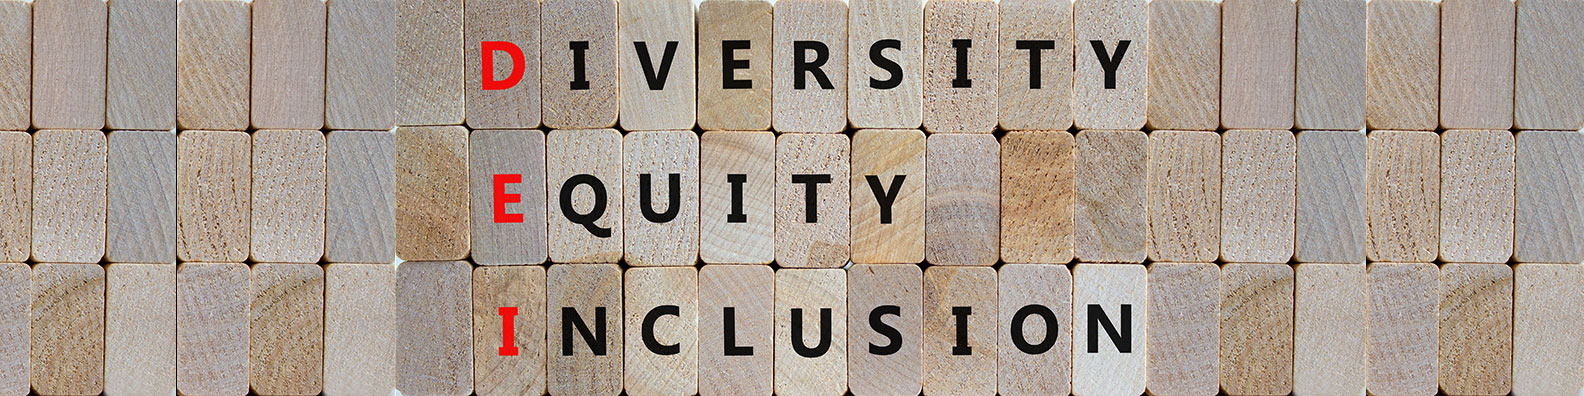 Diversity Equity Inclusion DEI LinkedIn Background Image